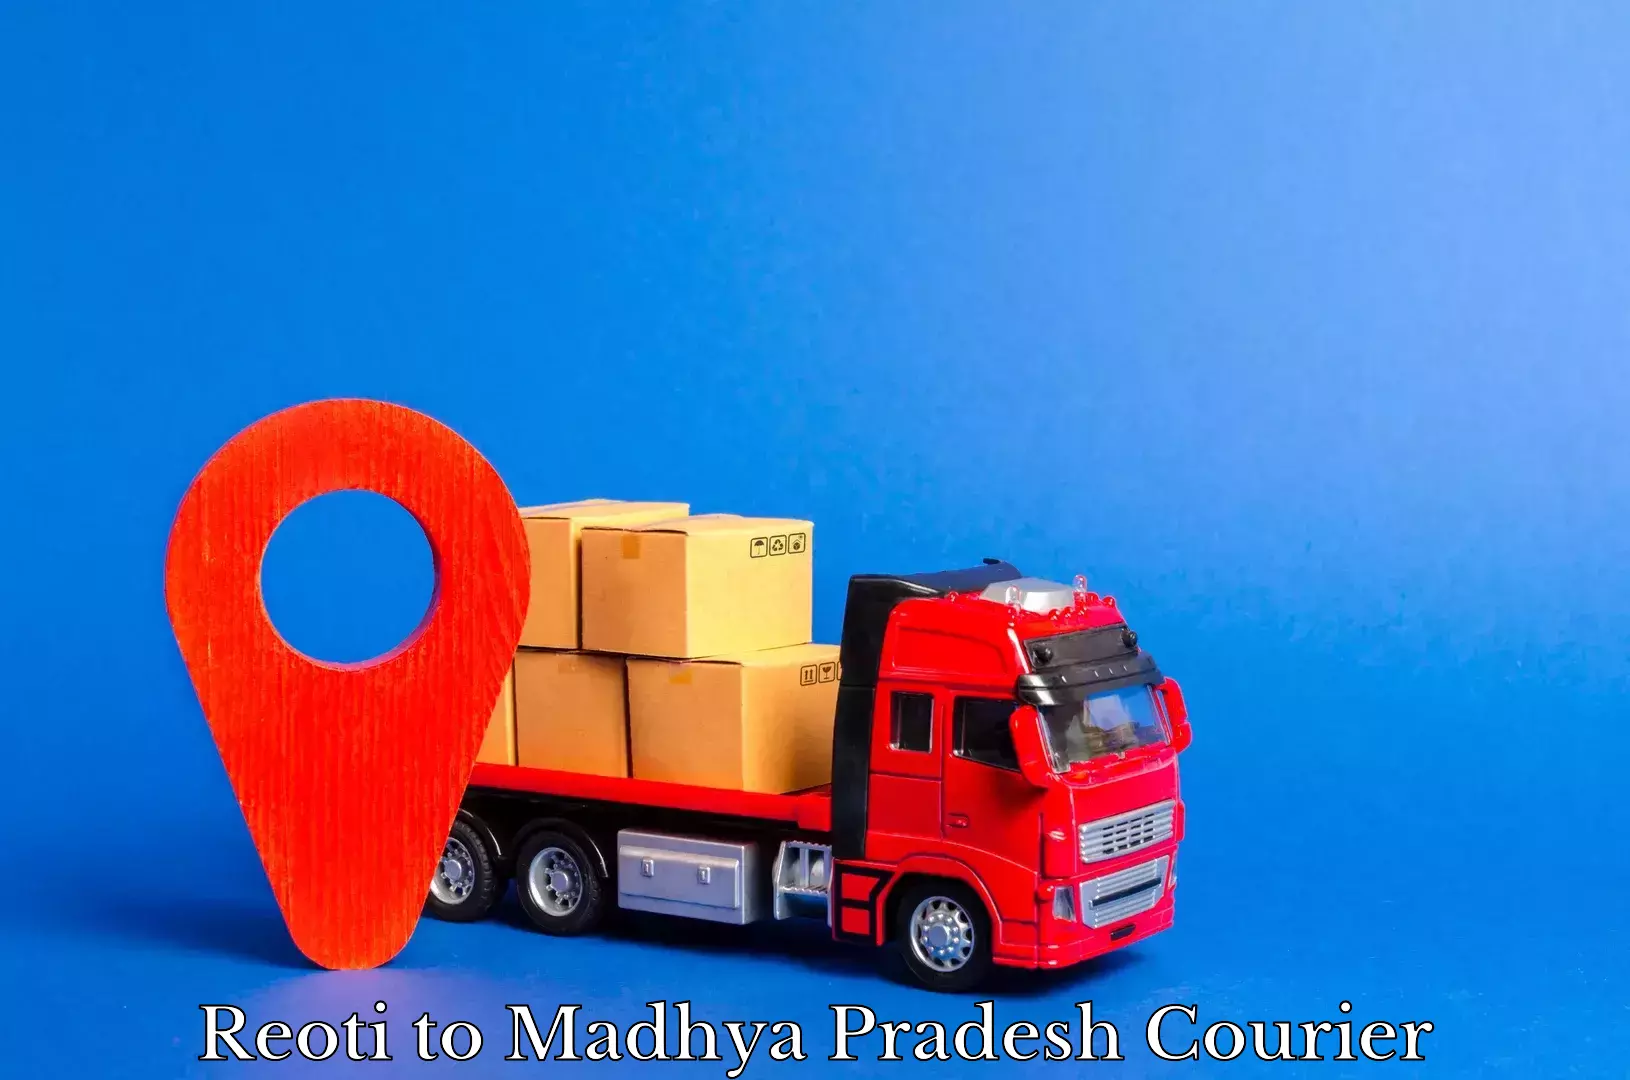 Advanced package delivery Reoti to Madhya Pradesh